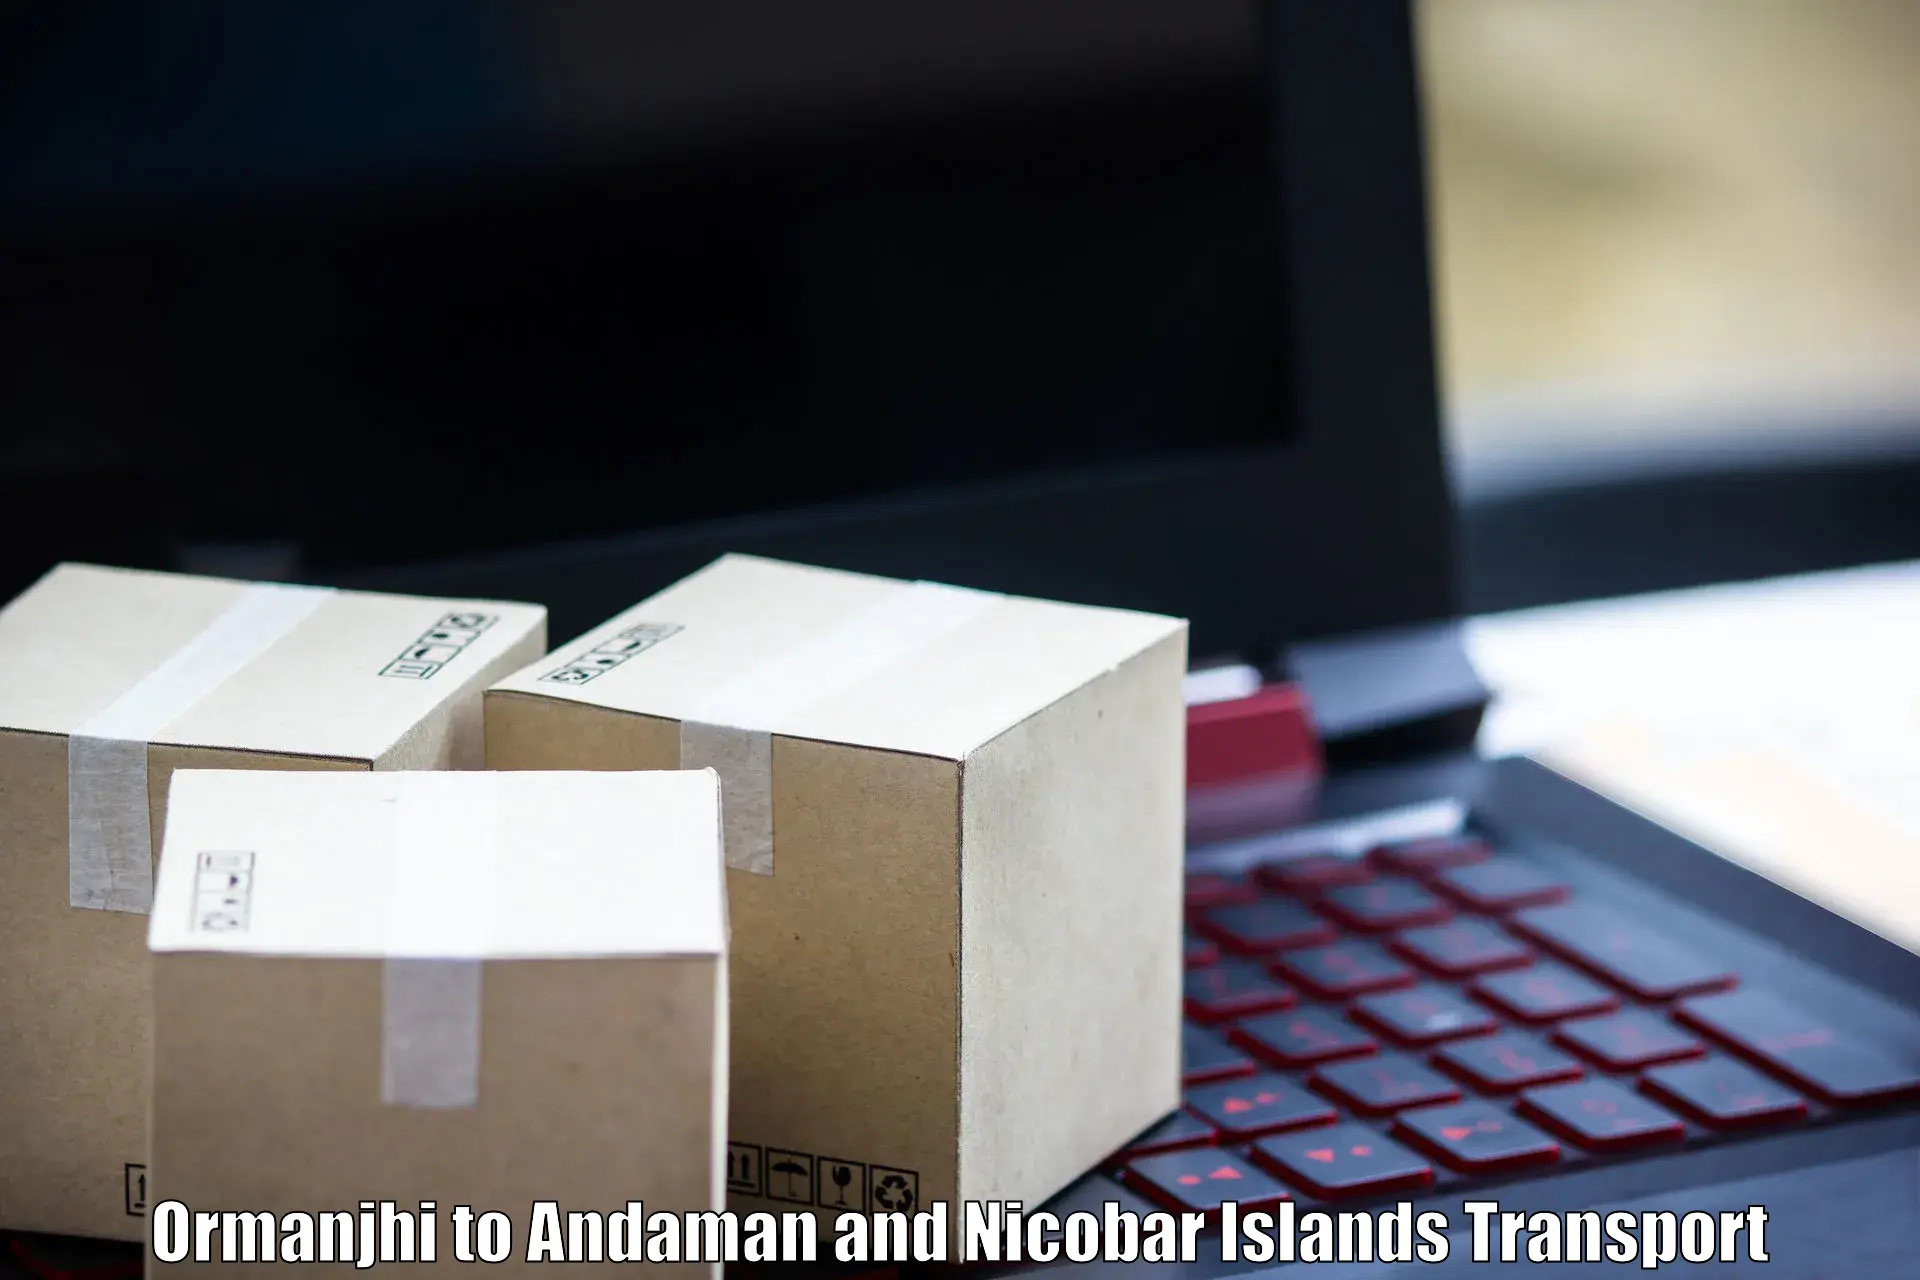 Shipping partner Ormanjhi to North And Middle Andaman